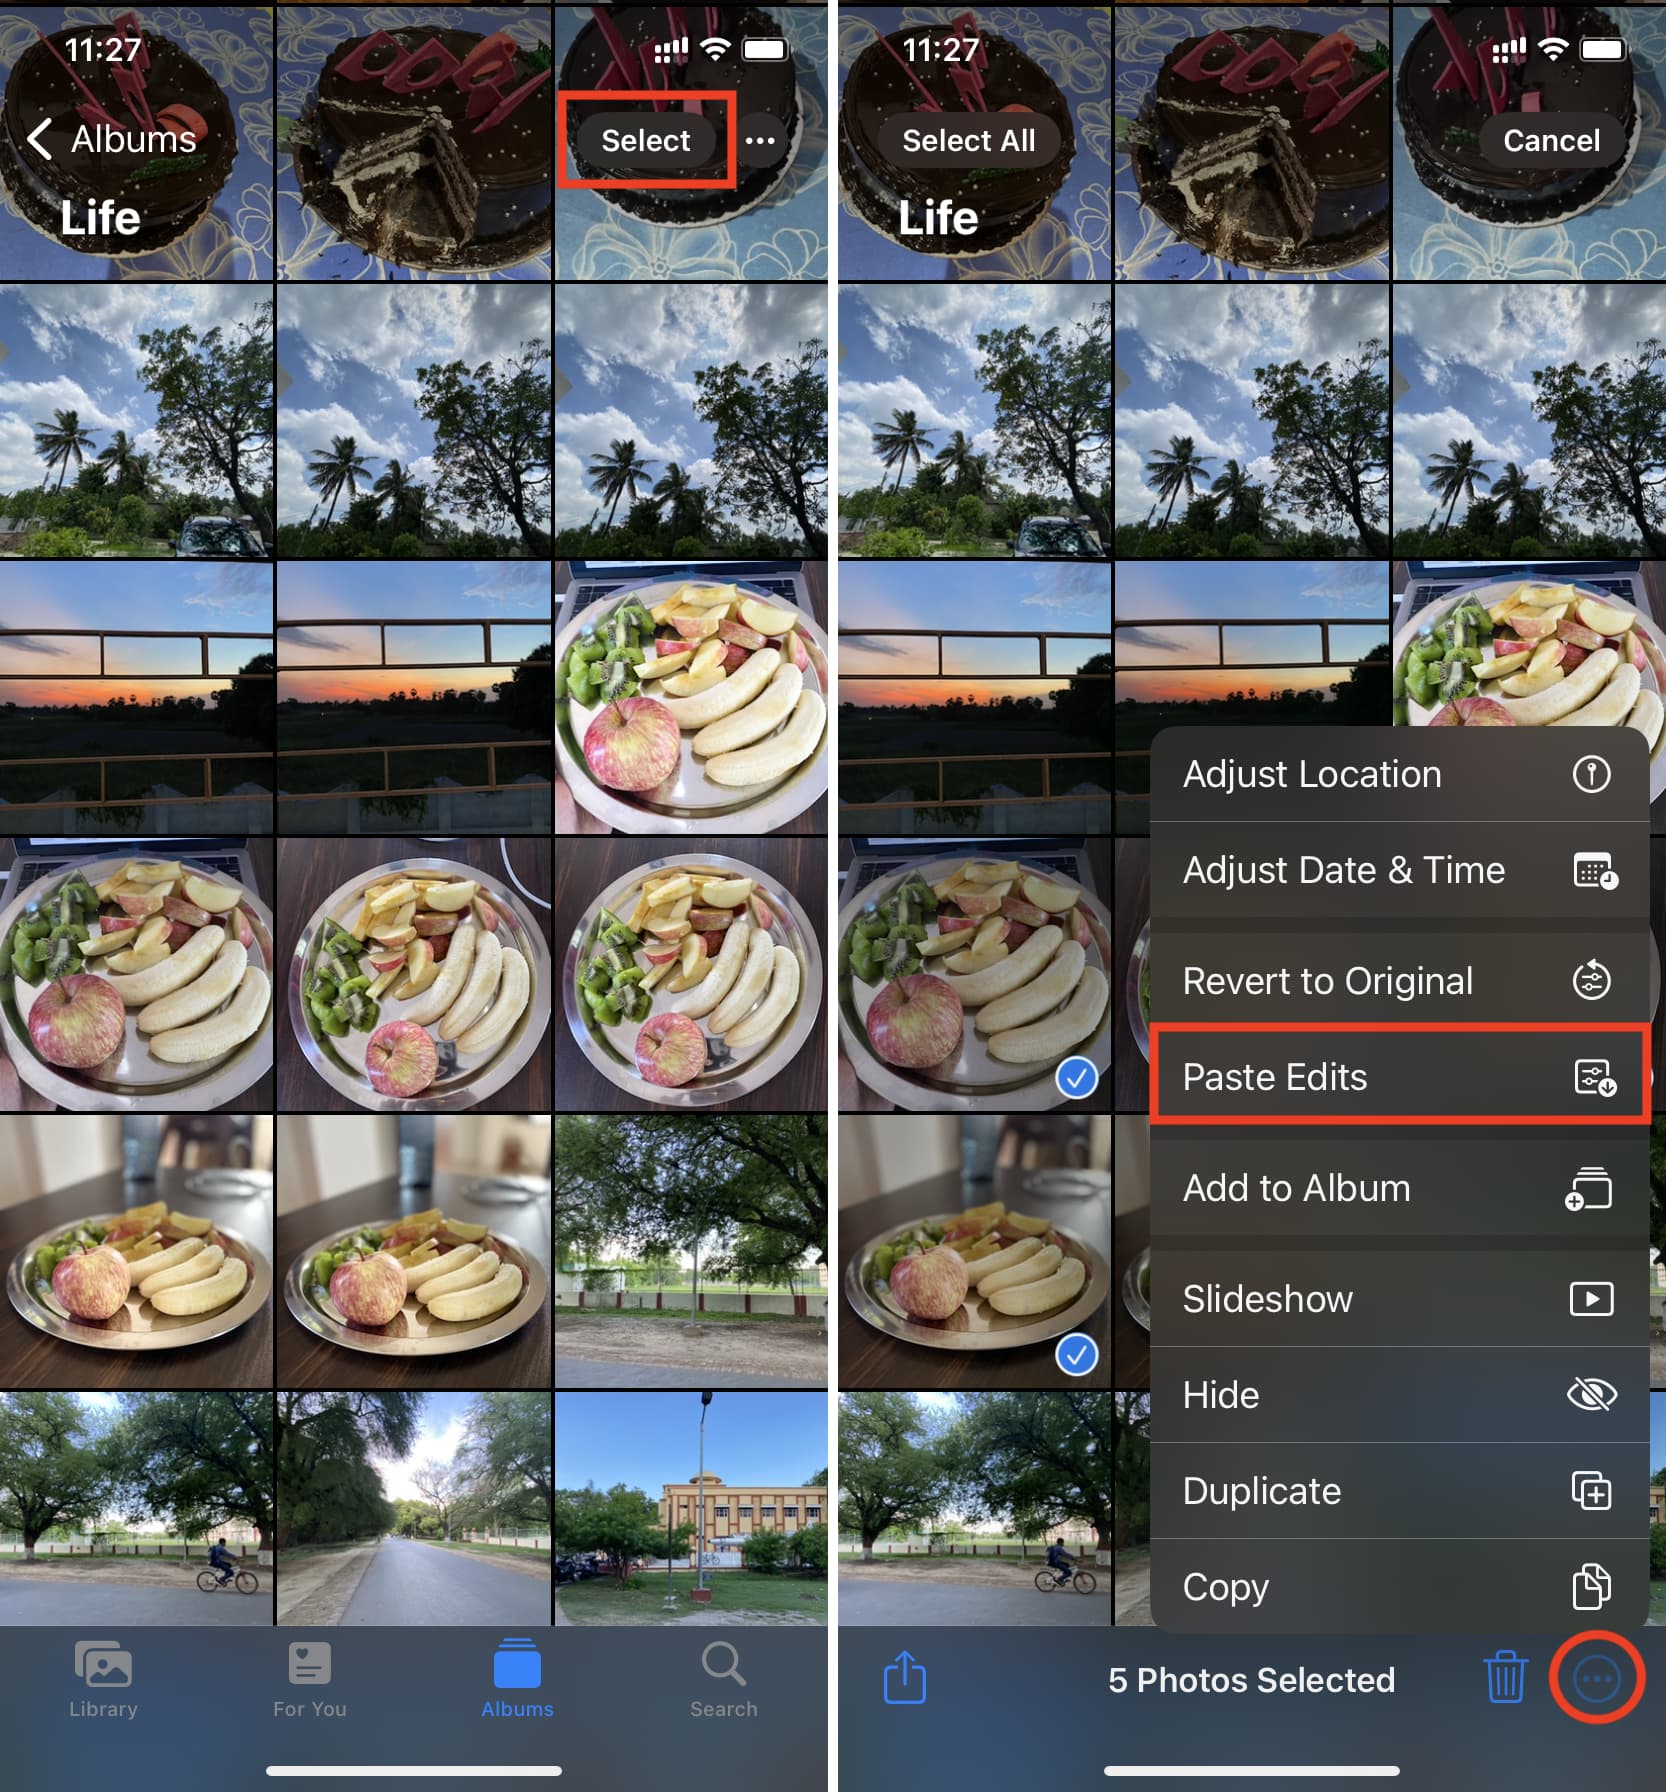 Paste Edits to several images in iPhone Photos app